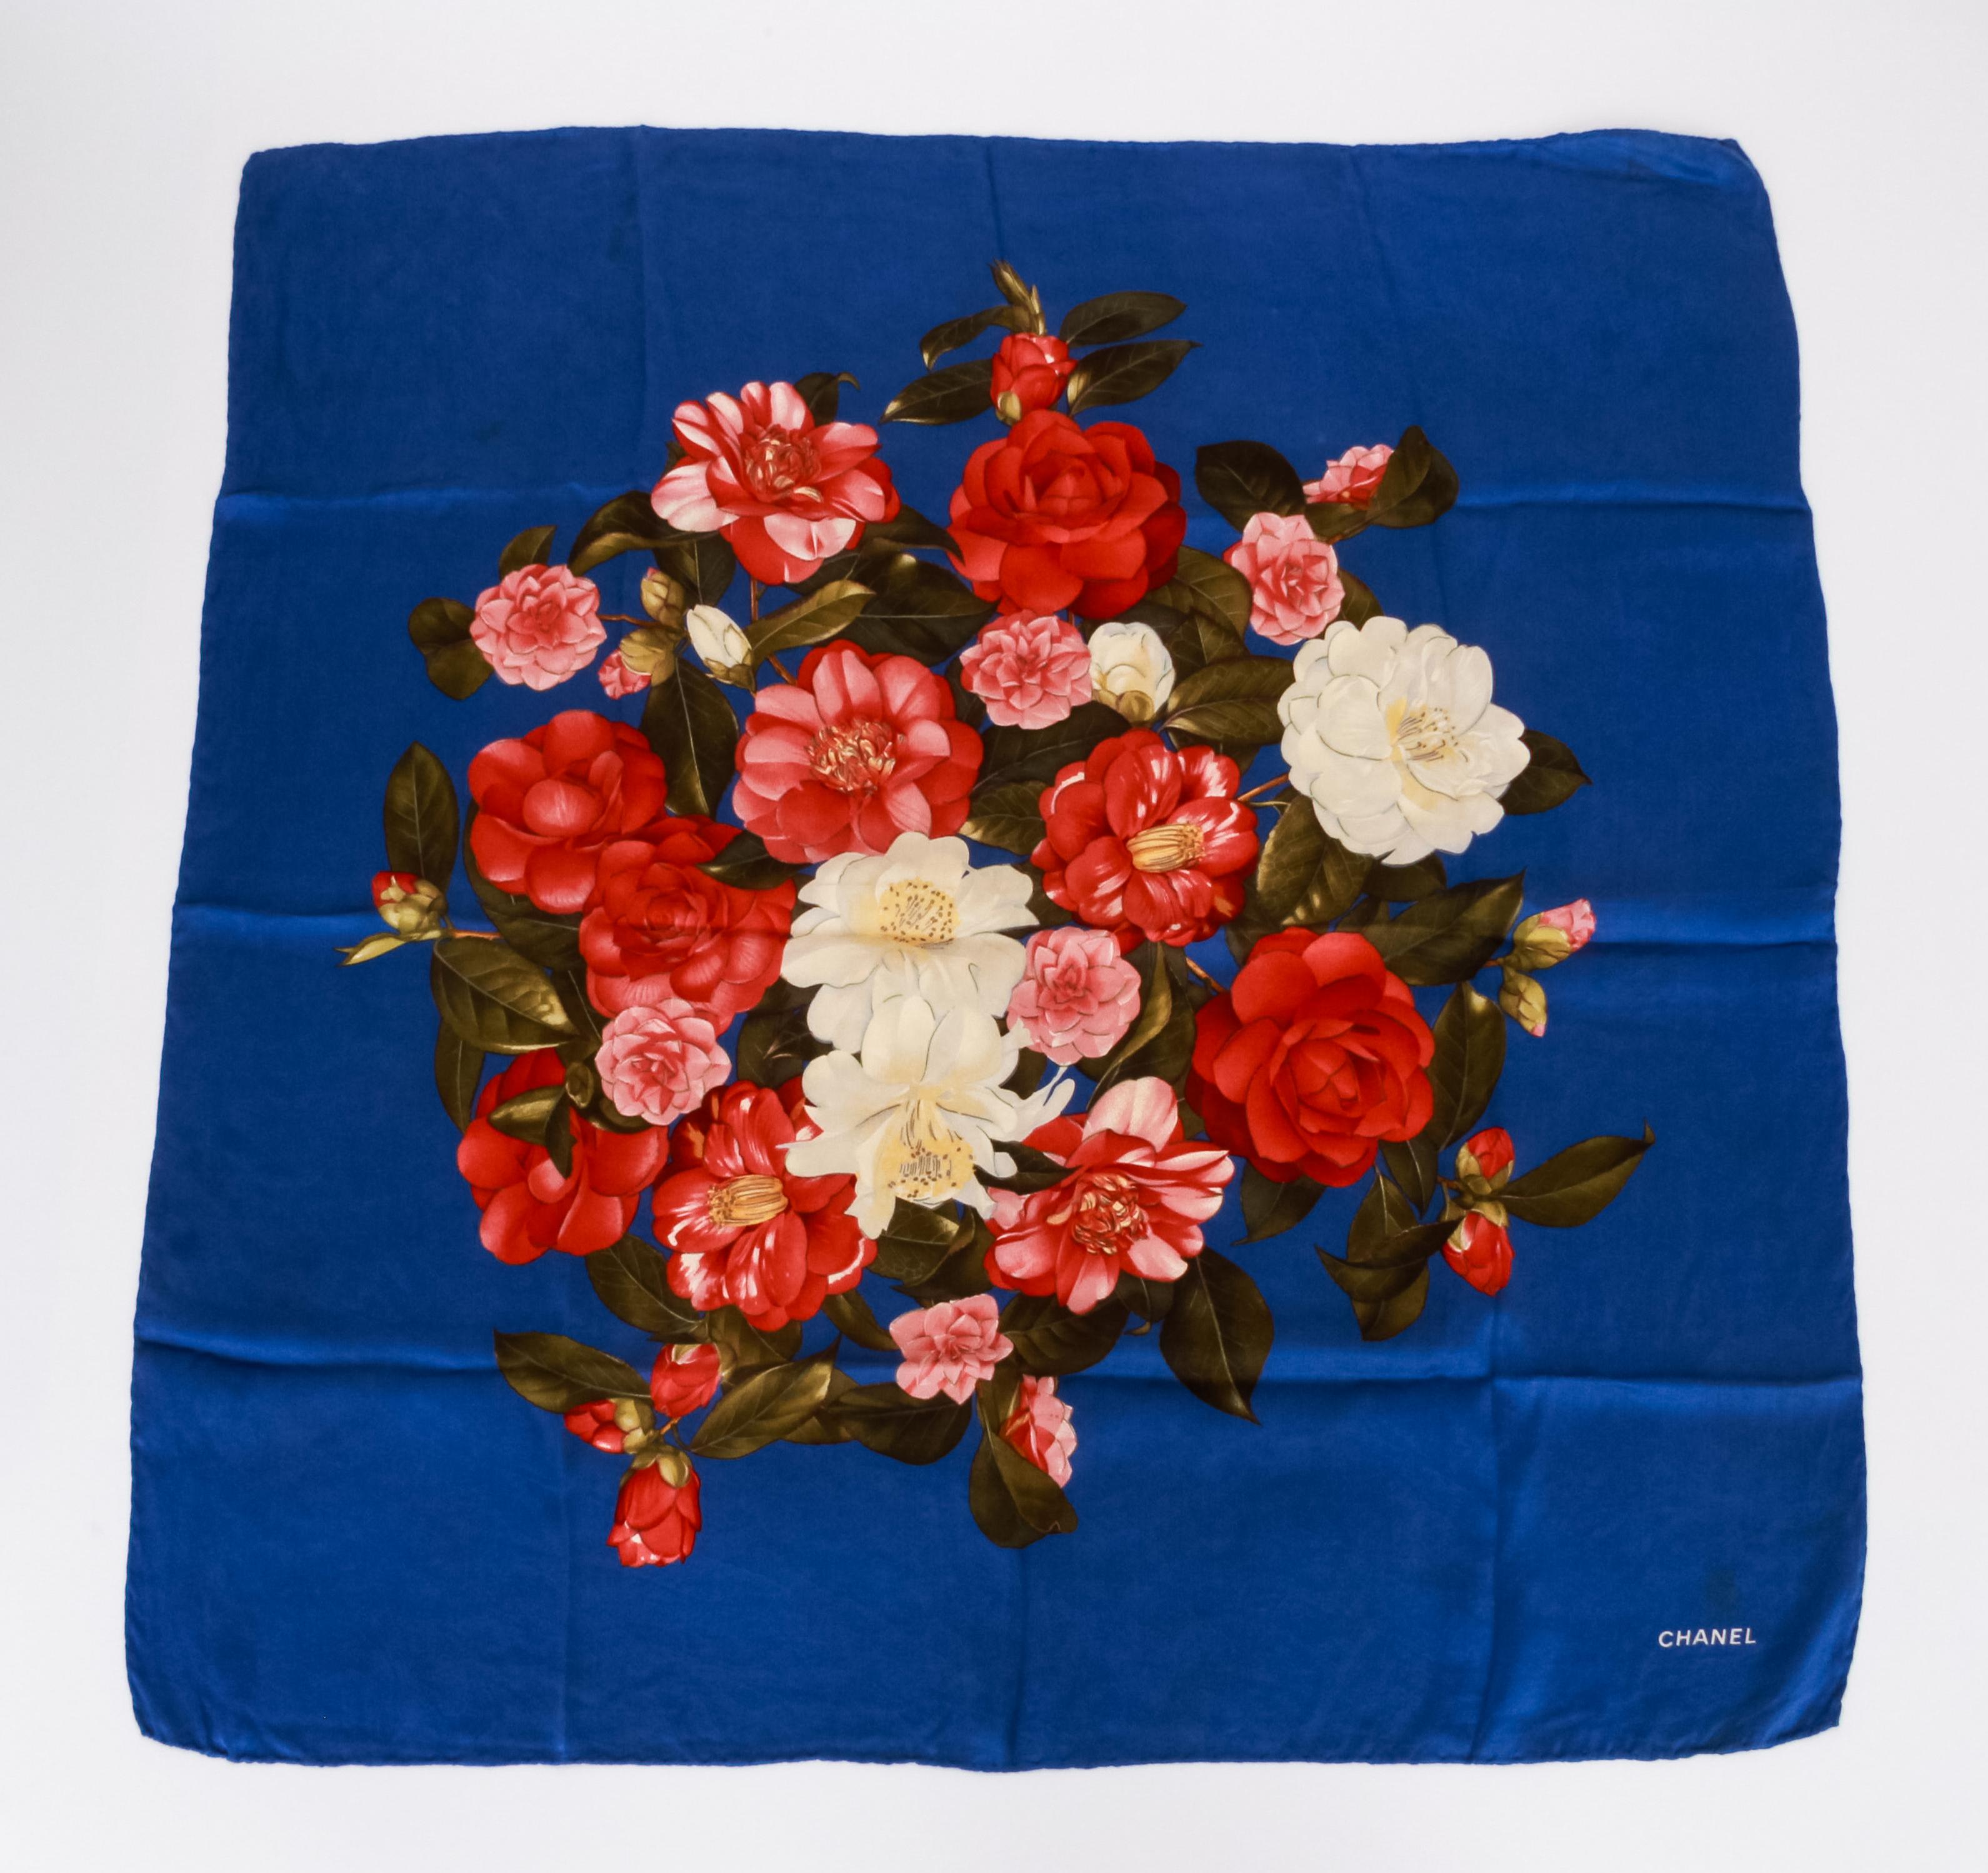 Chanel vintage electric blue silk scarf with pink and red flower bouquet design.
35